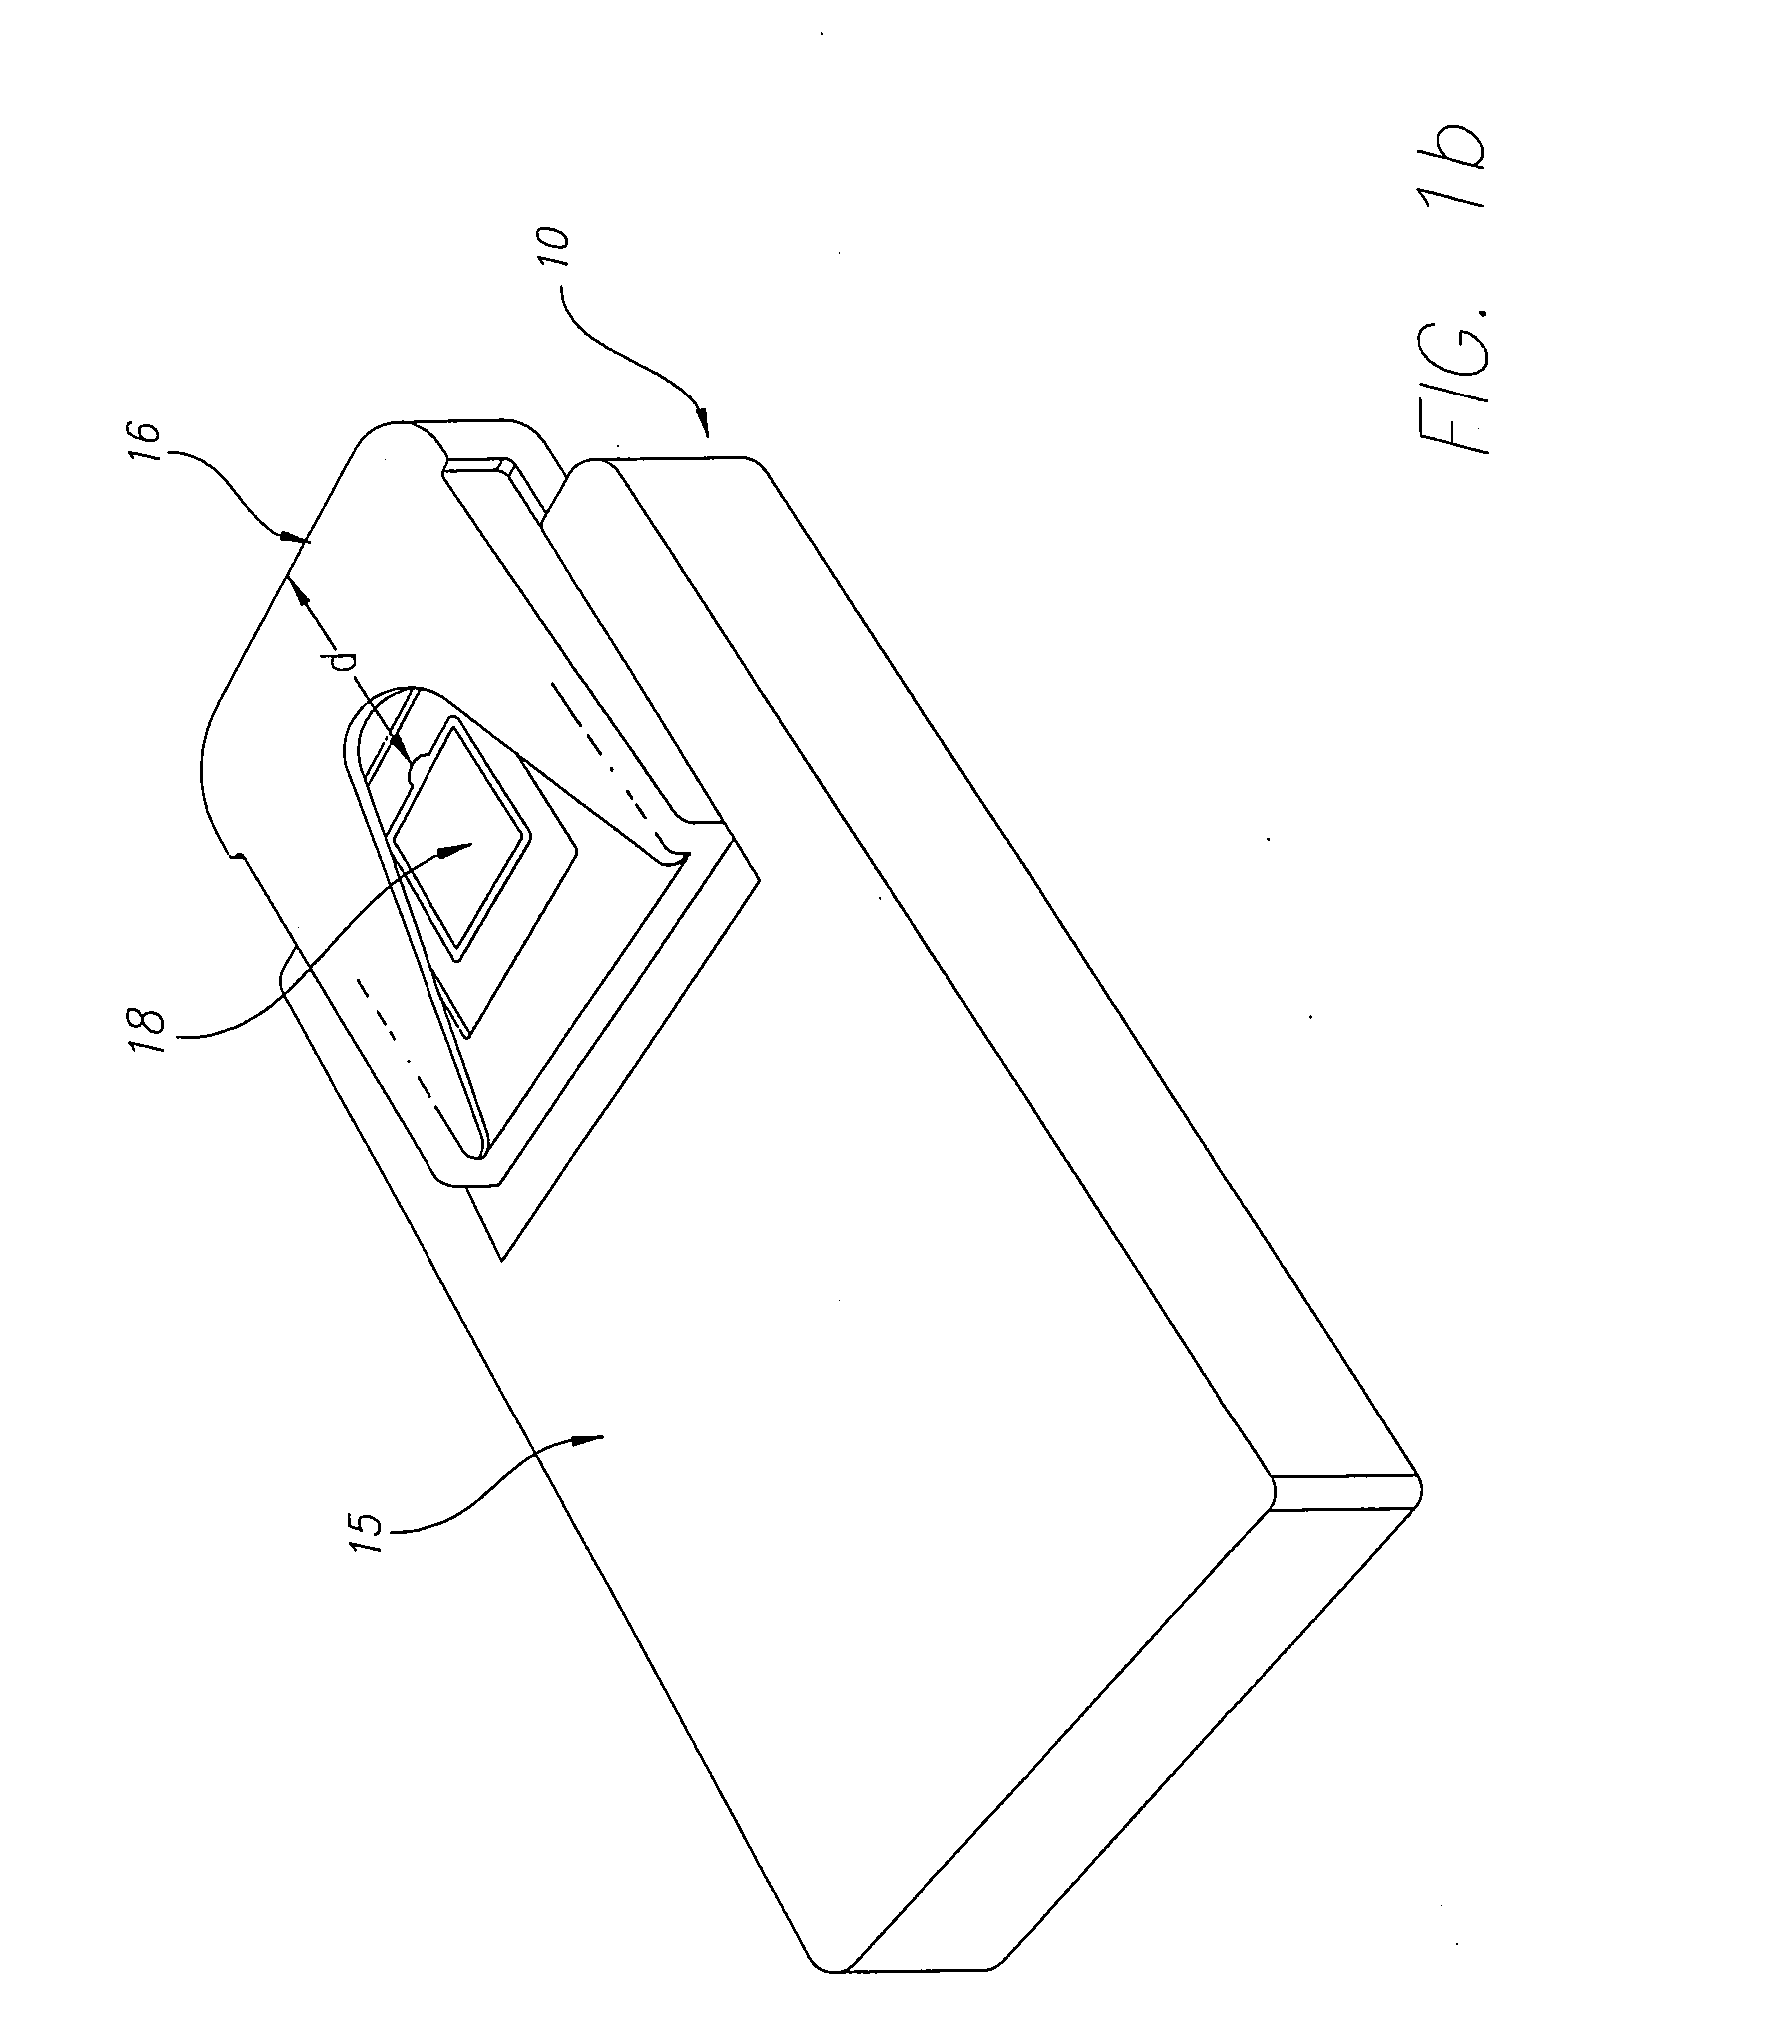 System and method for secure biometric identification